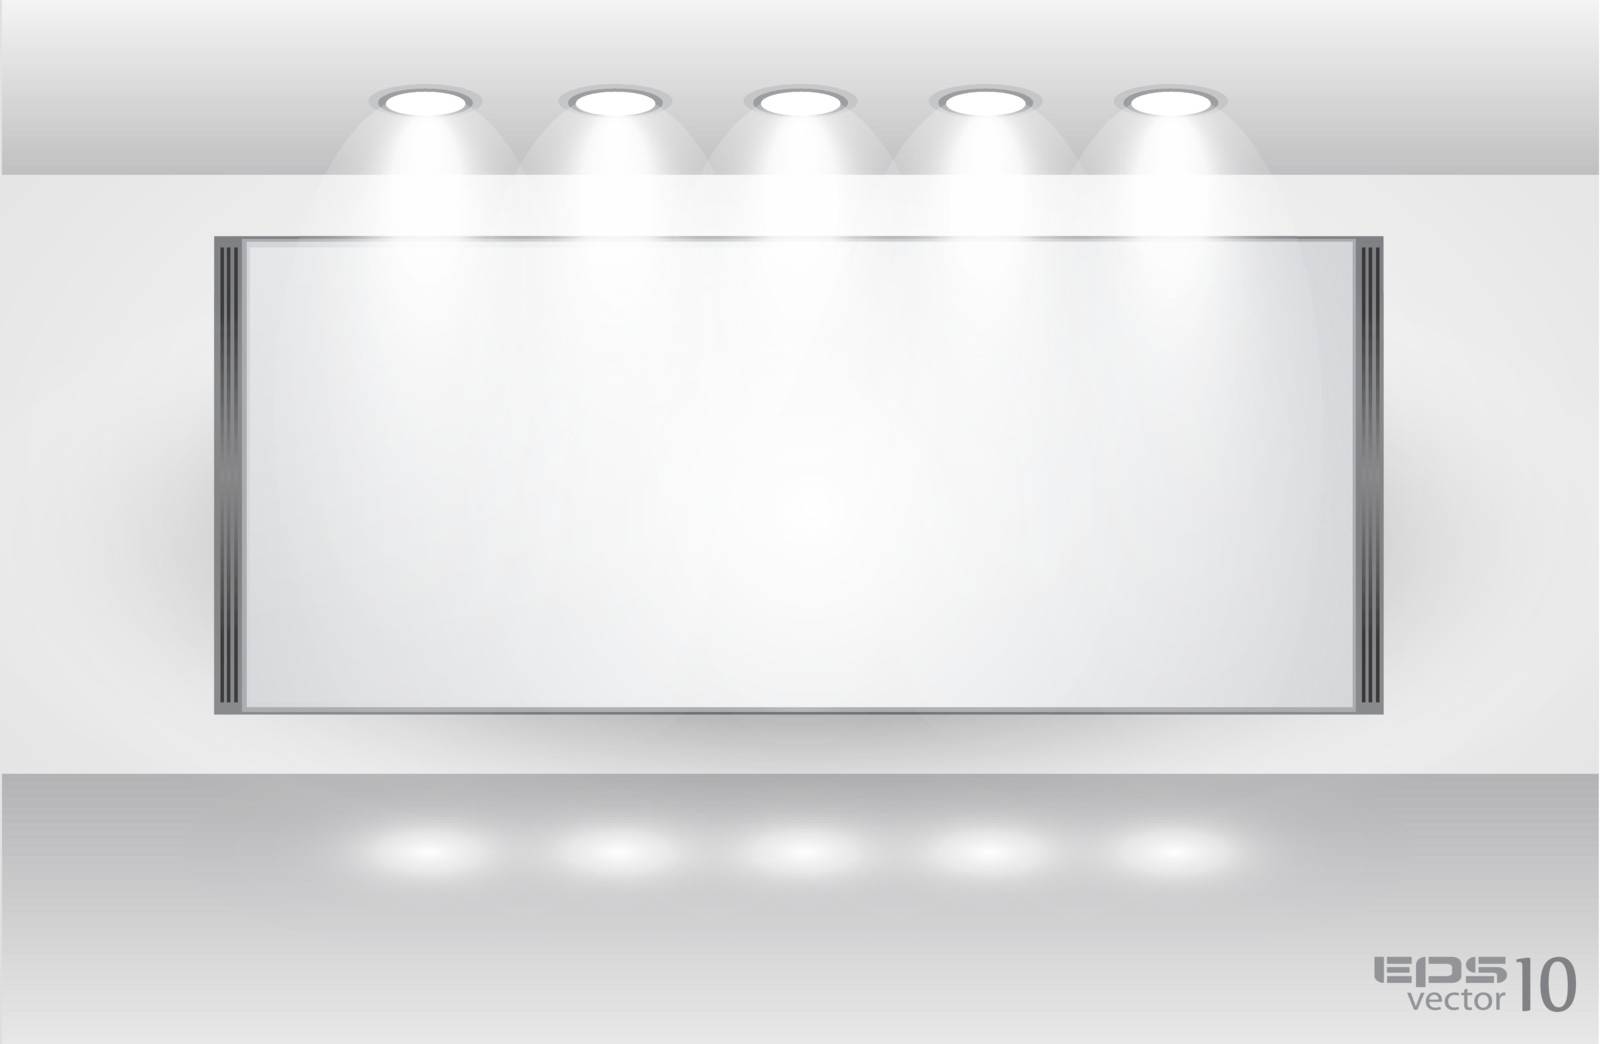 Showroom for product with LED spotlights and place for text or image